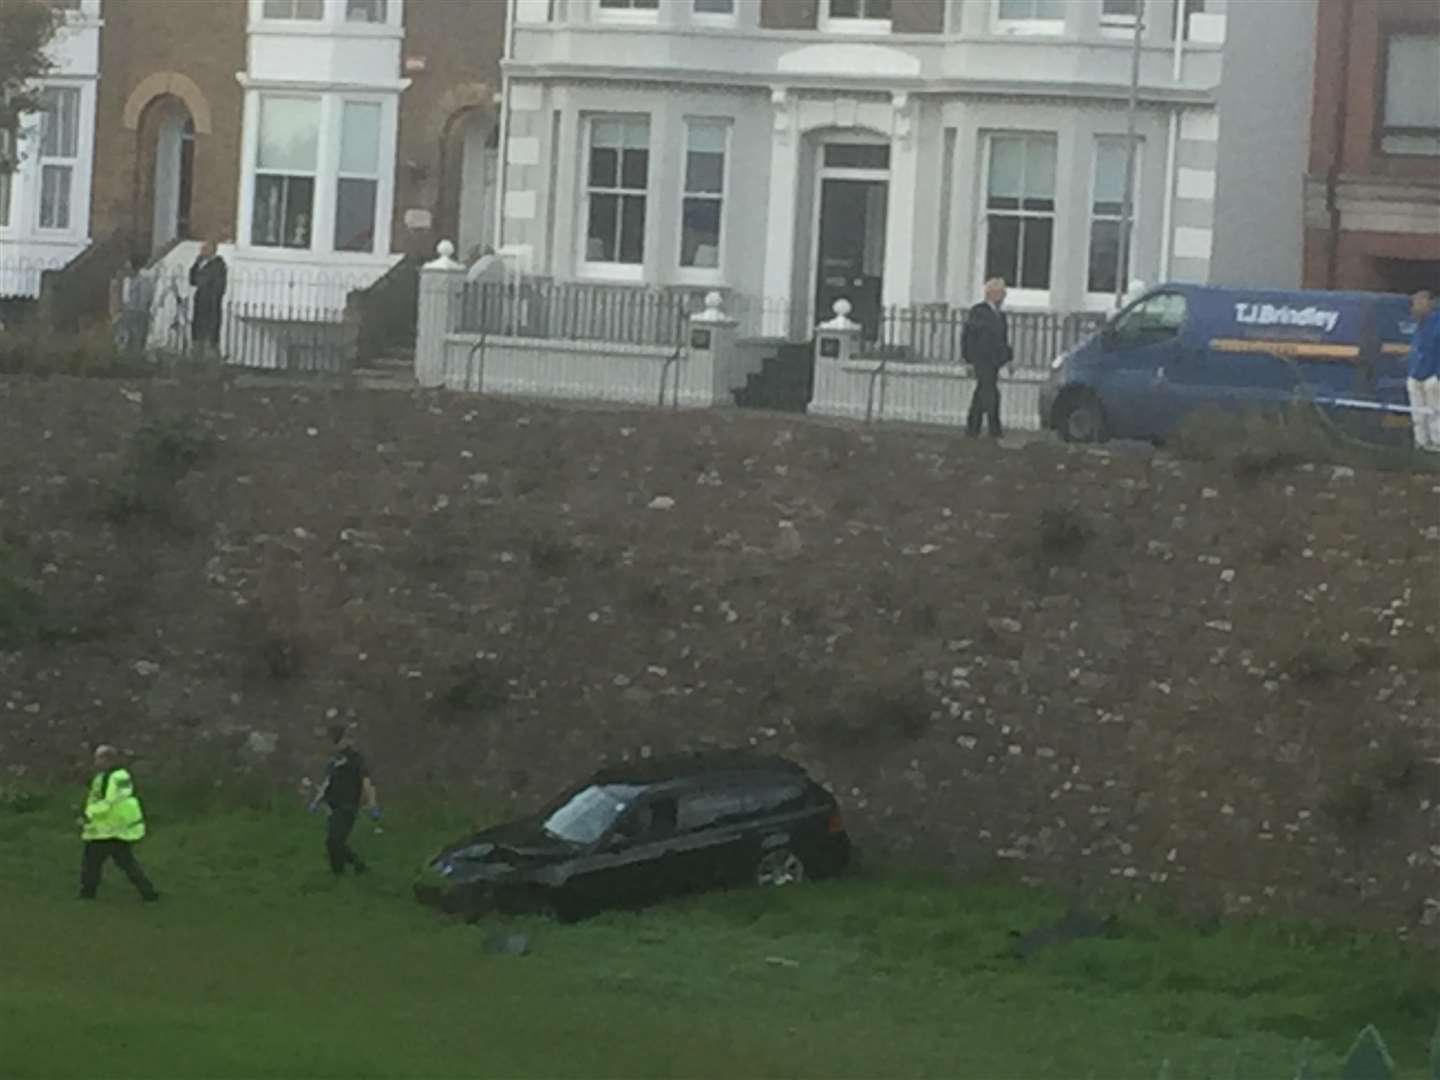 People inspect the damage after the car plunged into Deal Castle's moat (4047264)